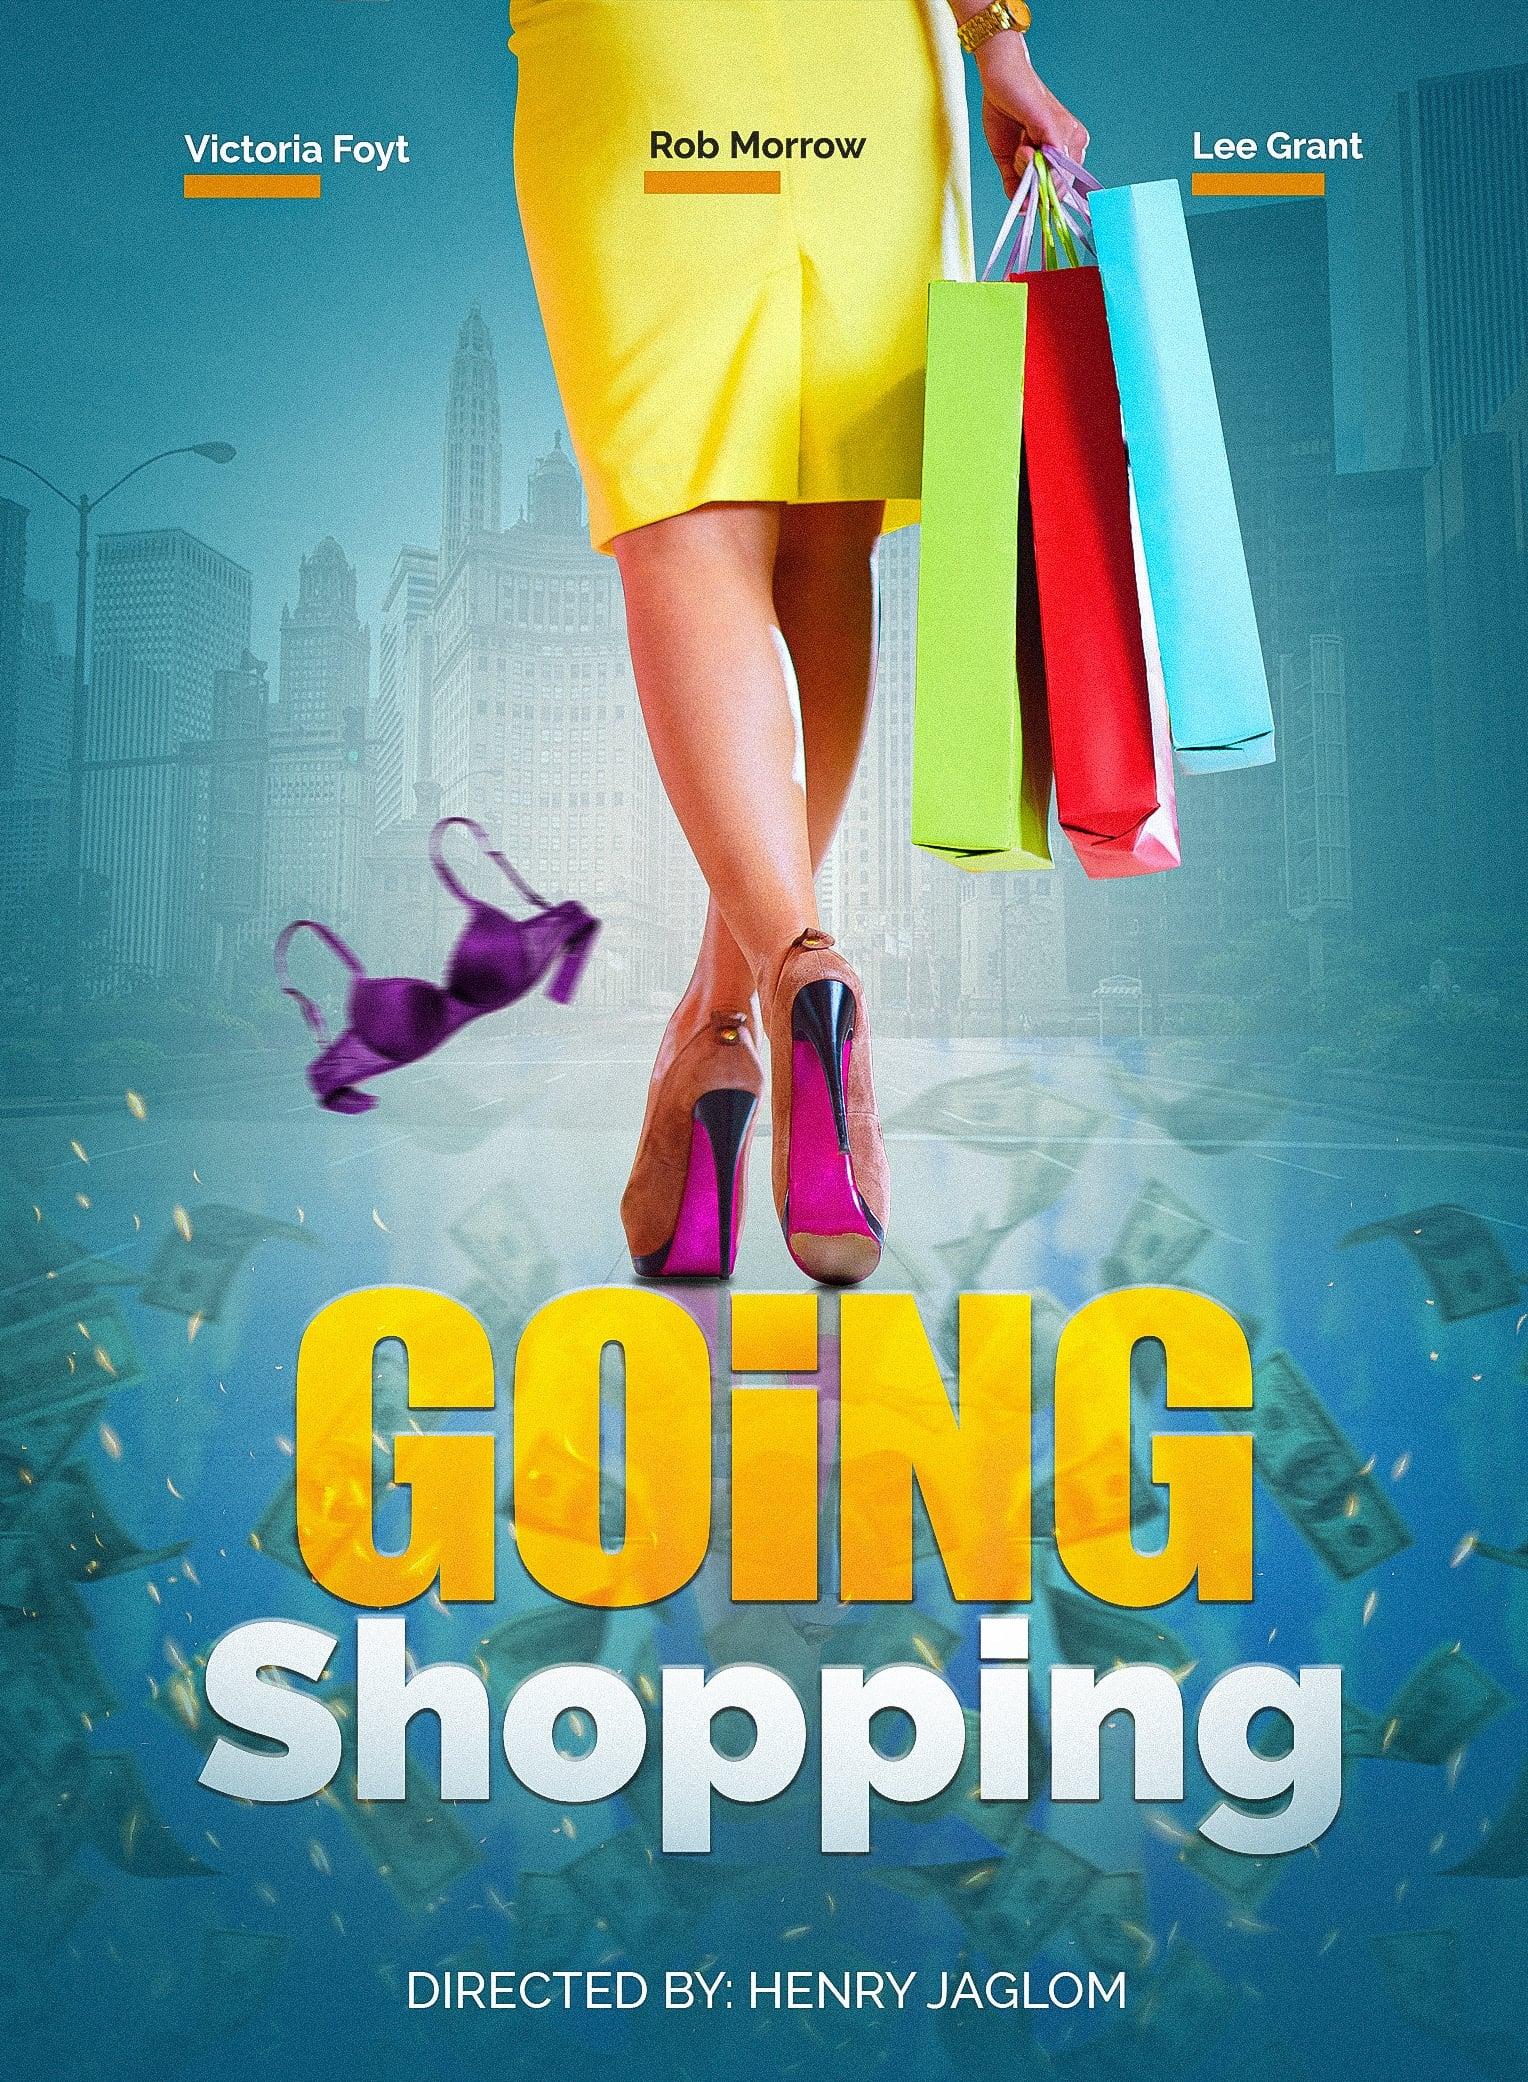 Going Shopping poster